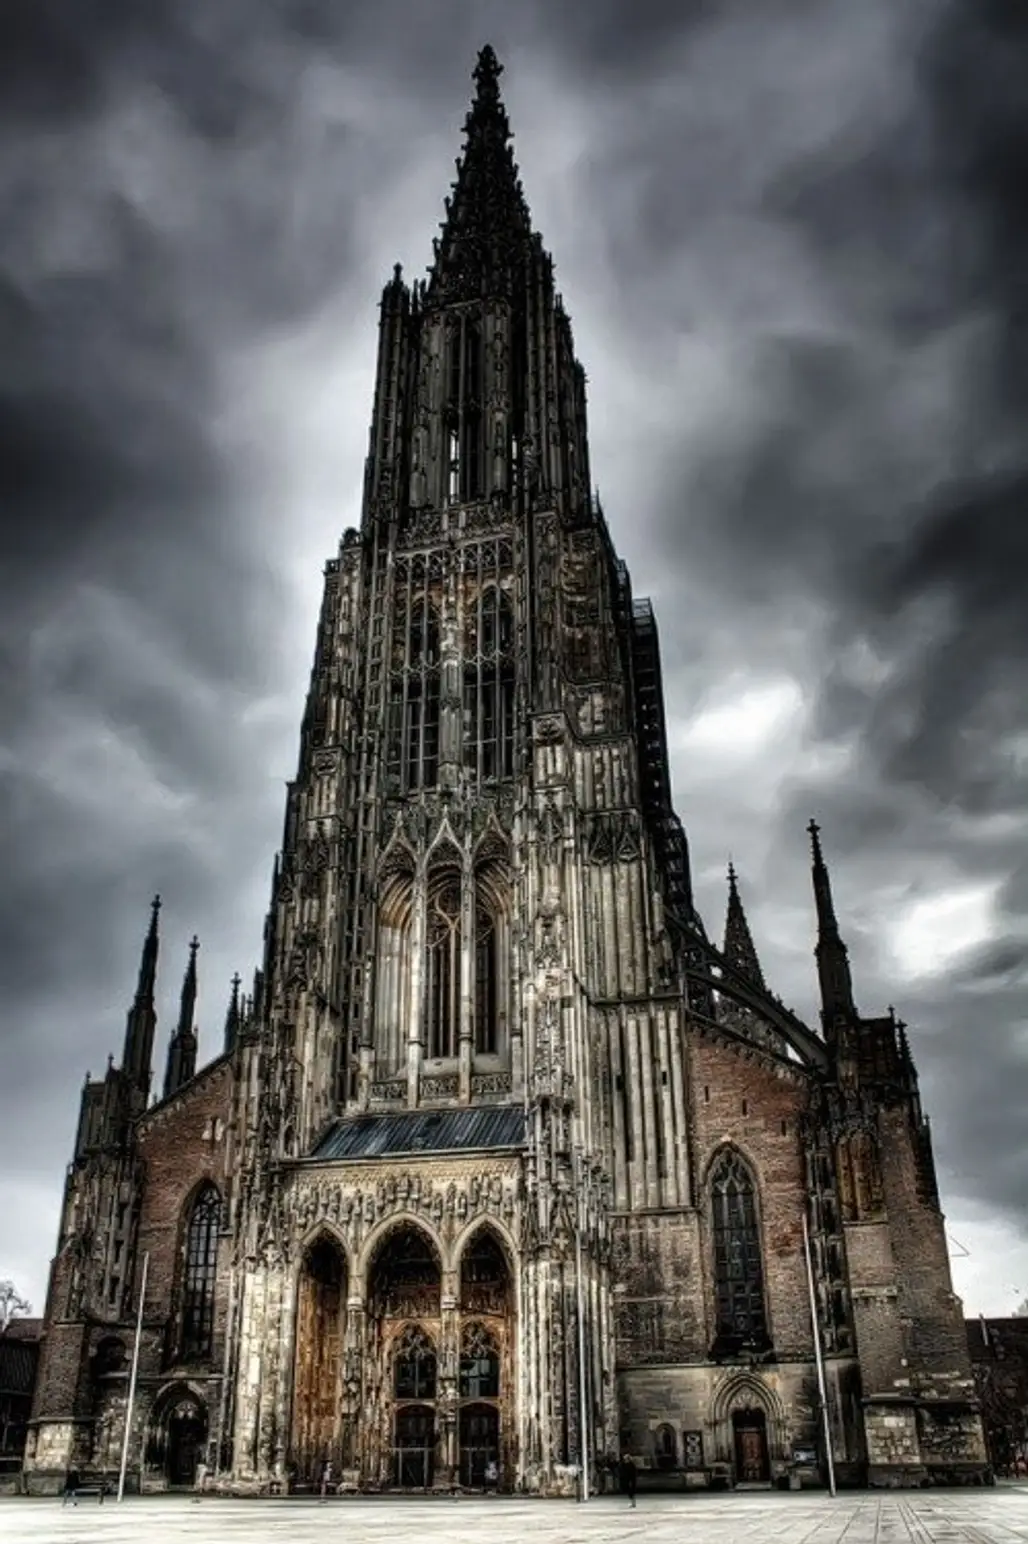 The Ulm Cathedral